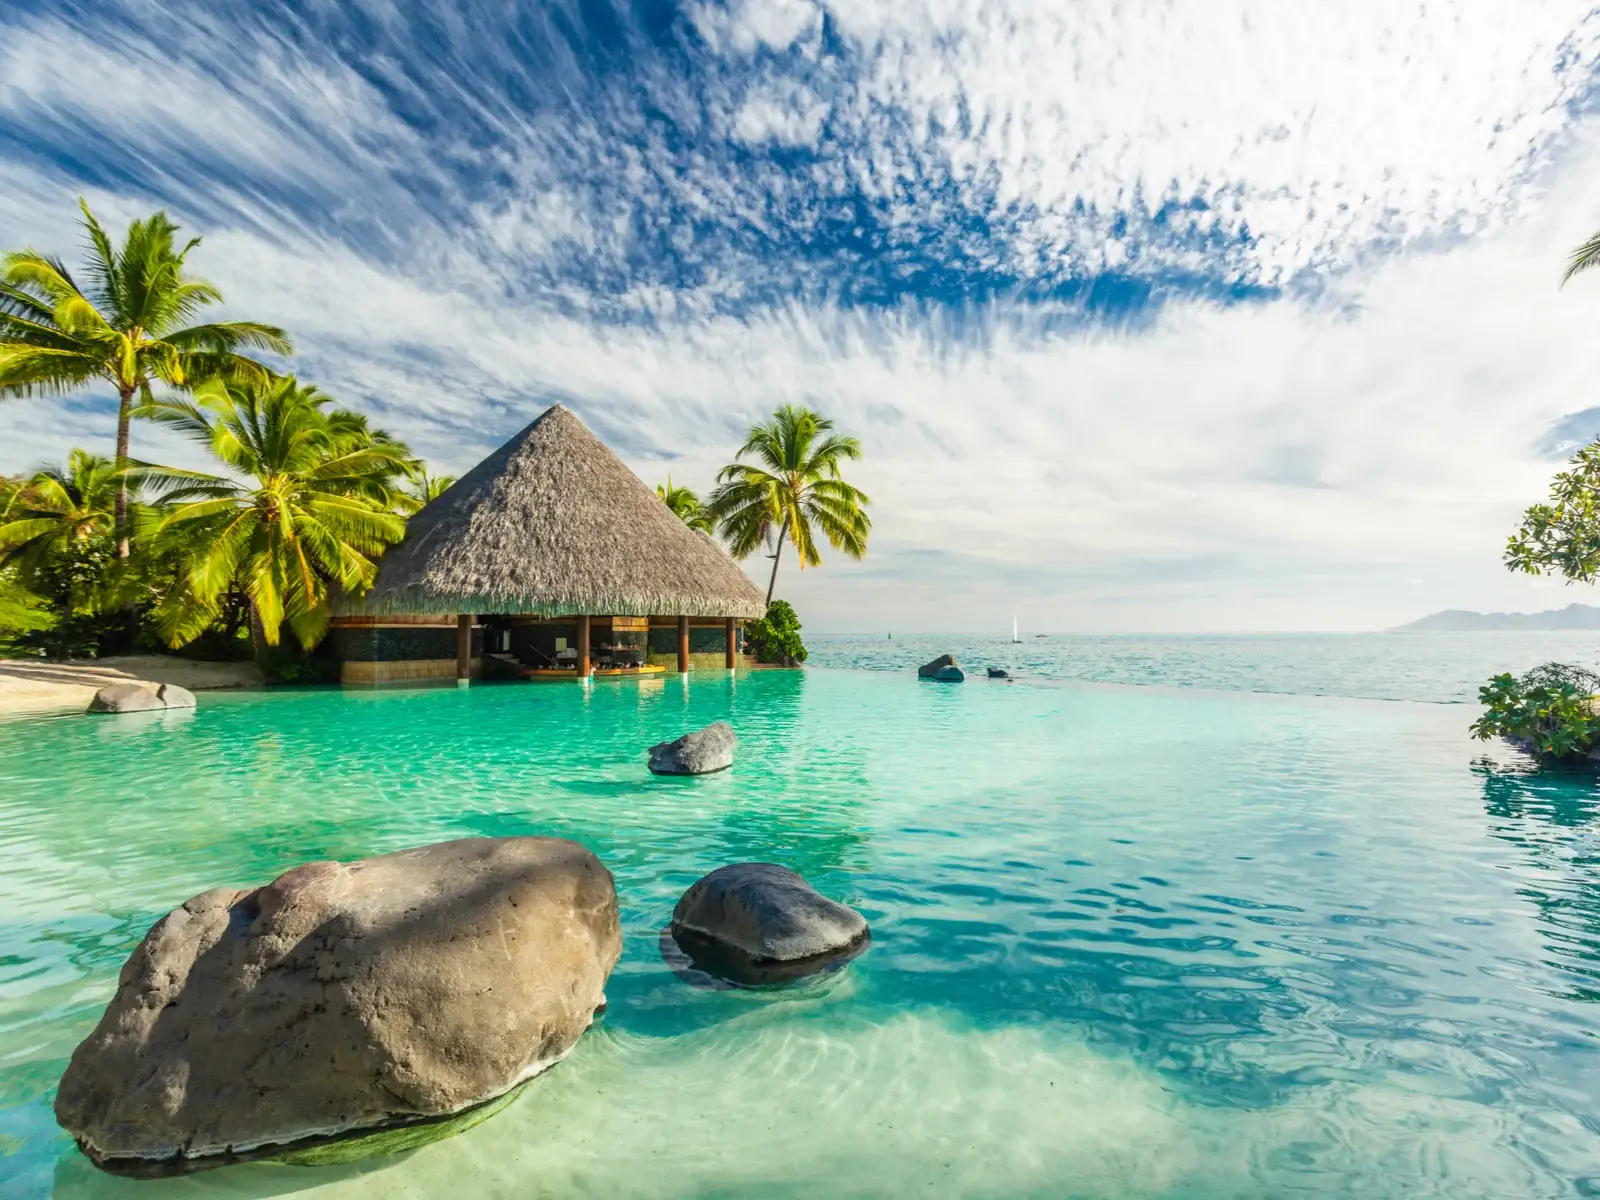 Infinity pool showing why you should visit Tahiti with gorgeous clear water and tropical views